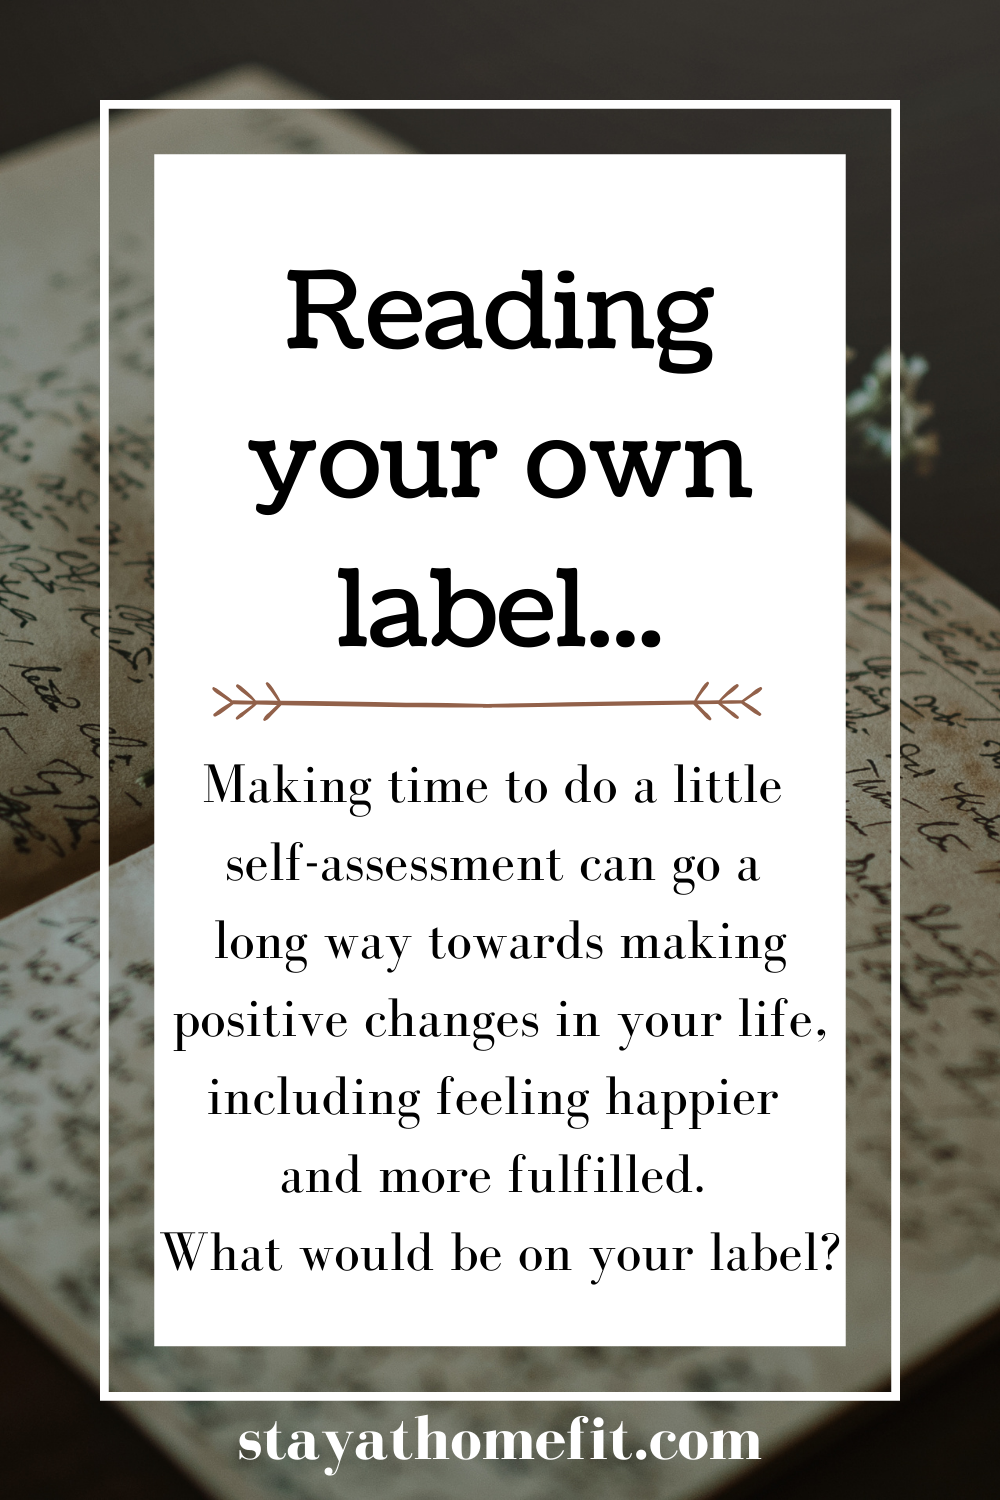 Reading your own label...